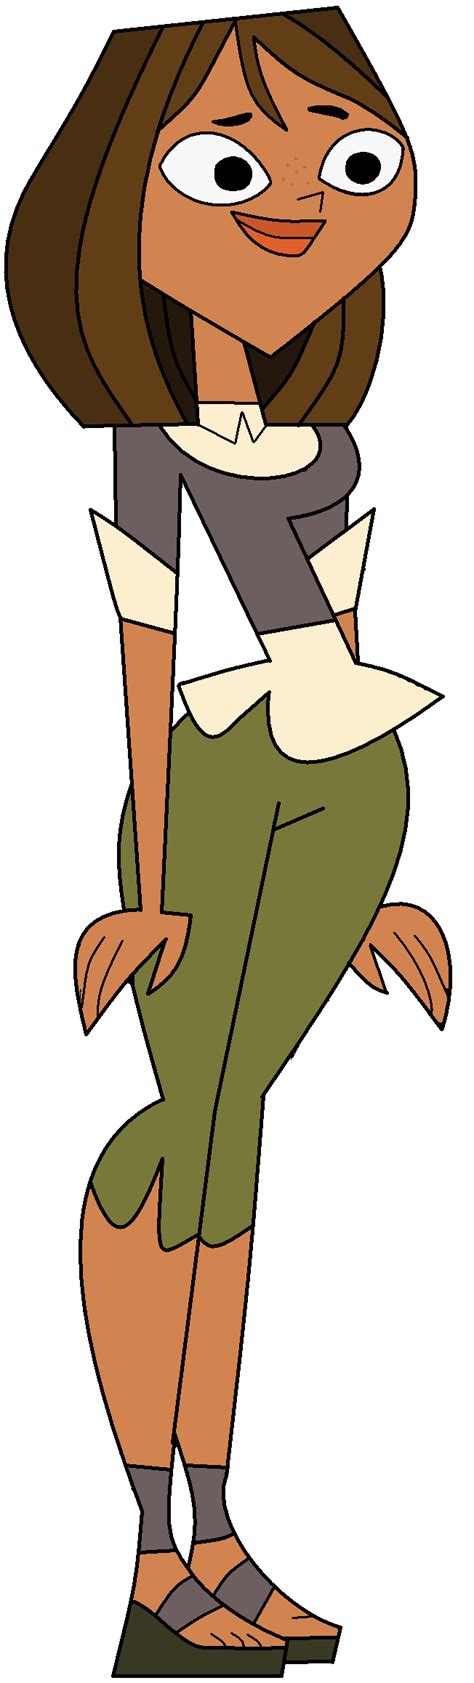 Courtney The Total Drama Games Wiki Fandom Powered By